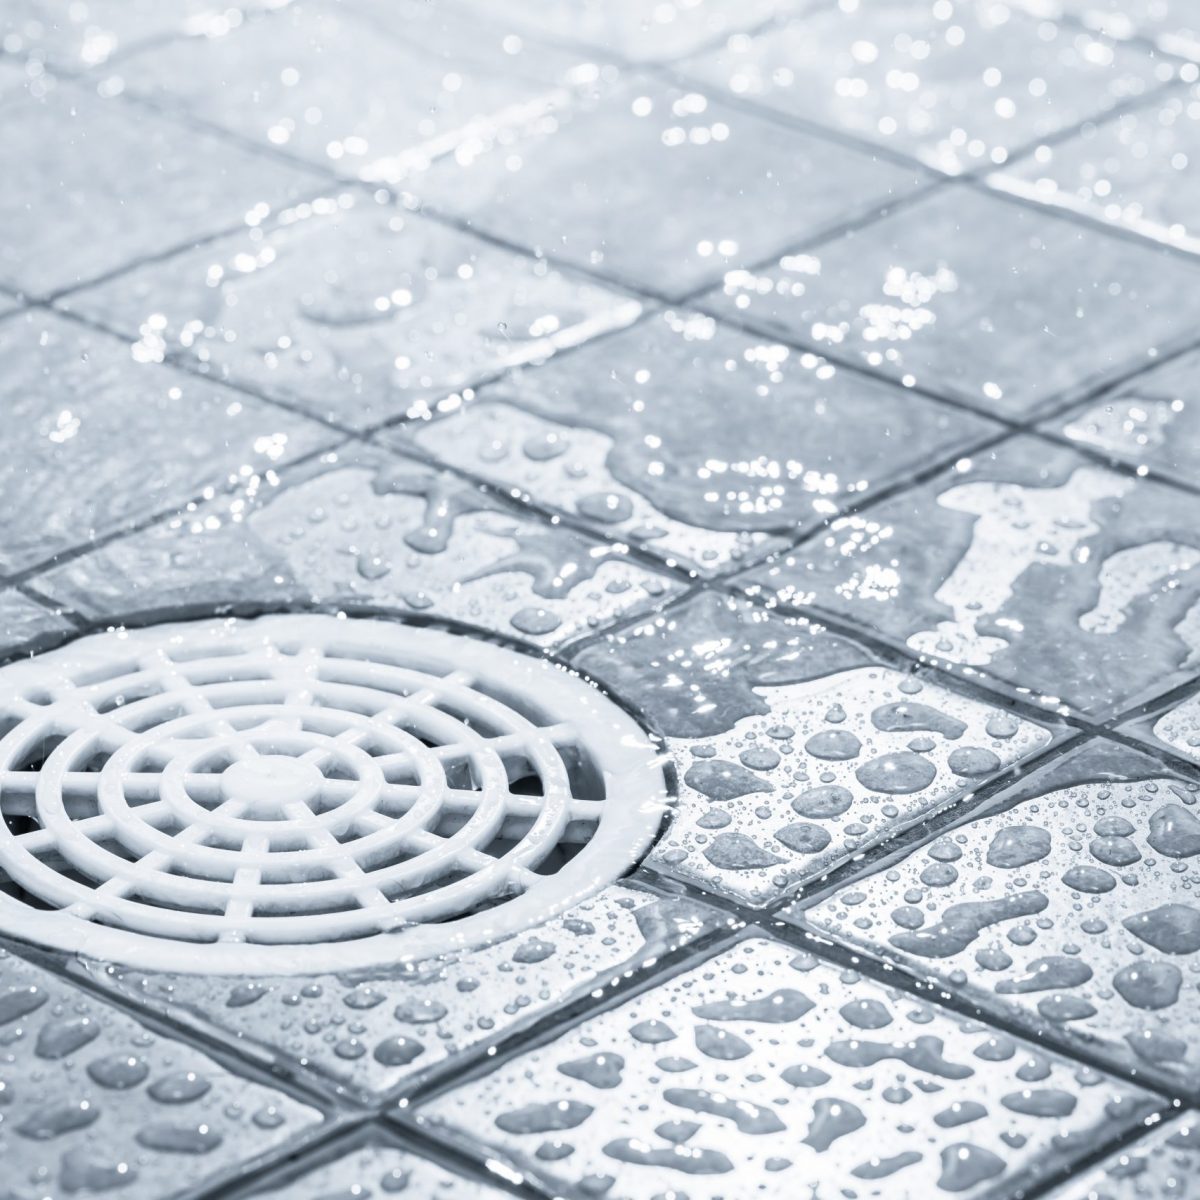 https://storables.com/wp-content/uploads/2022/06/Drain-Cover-Featured-Image-scaled-1200x1200.jpeg